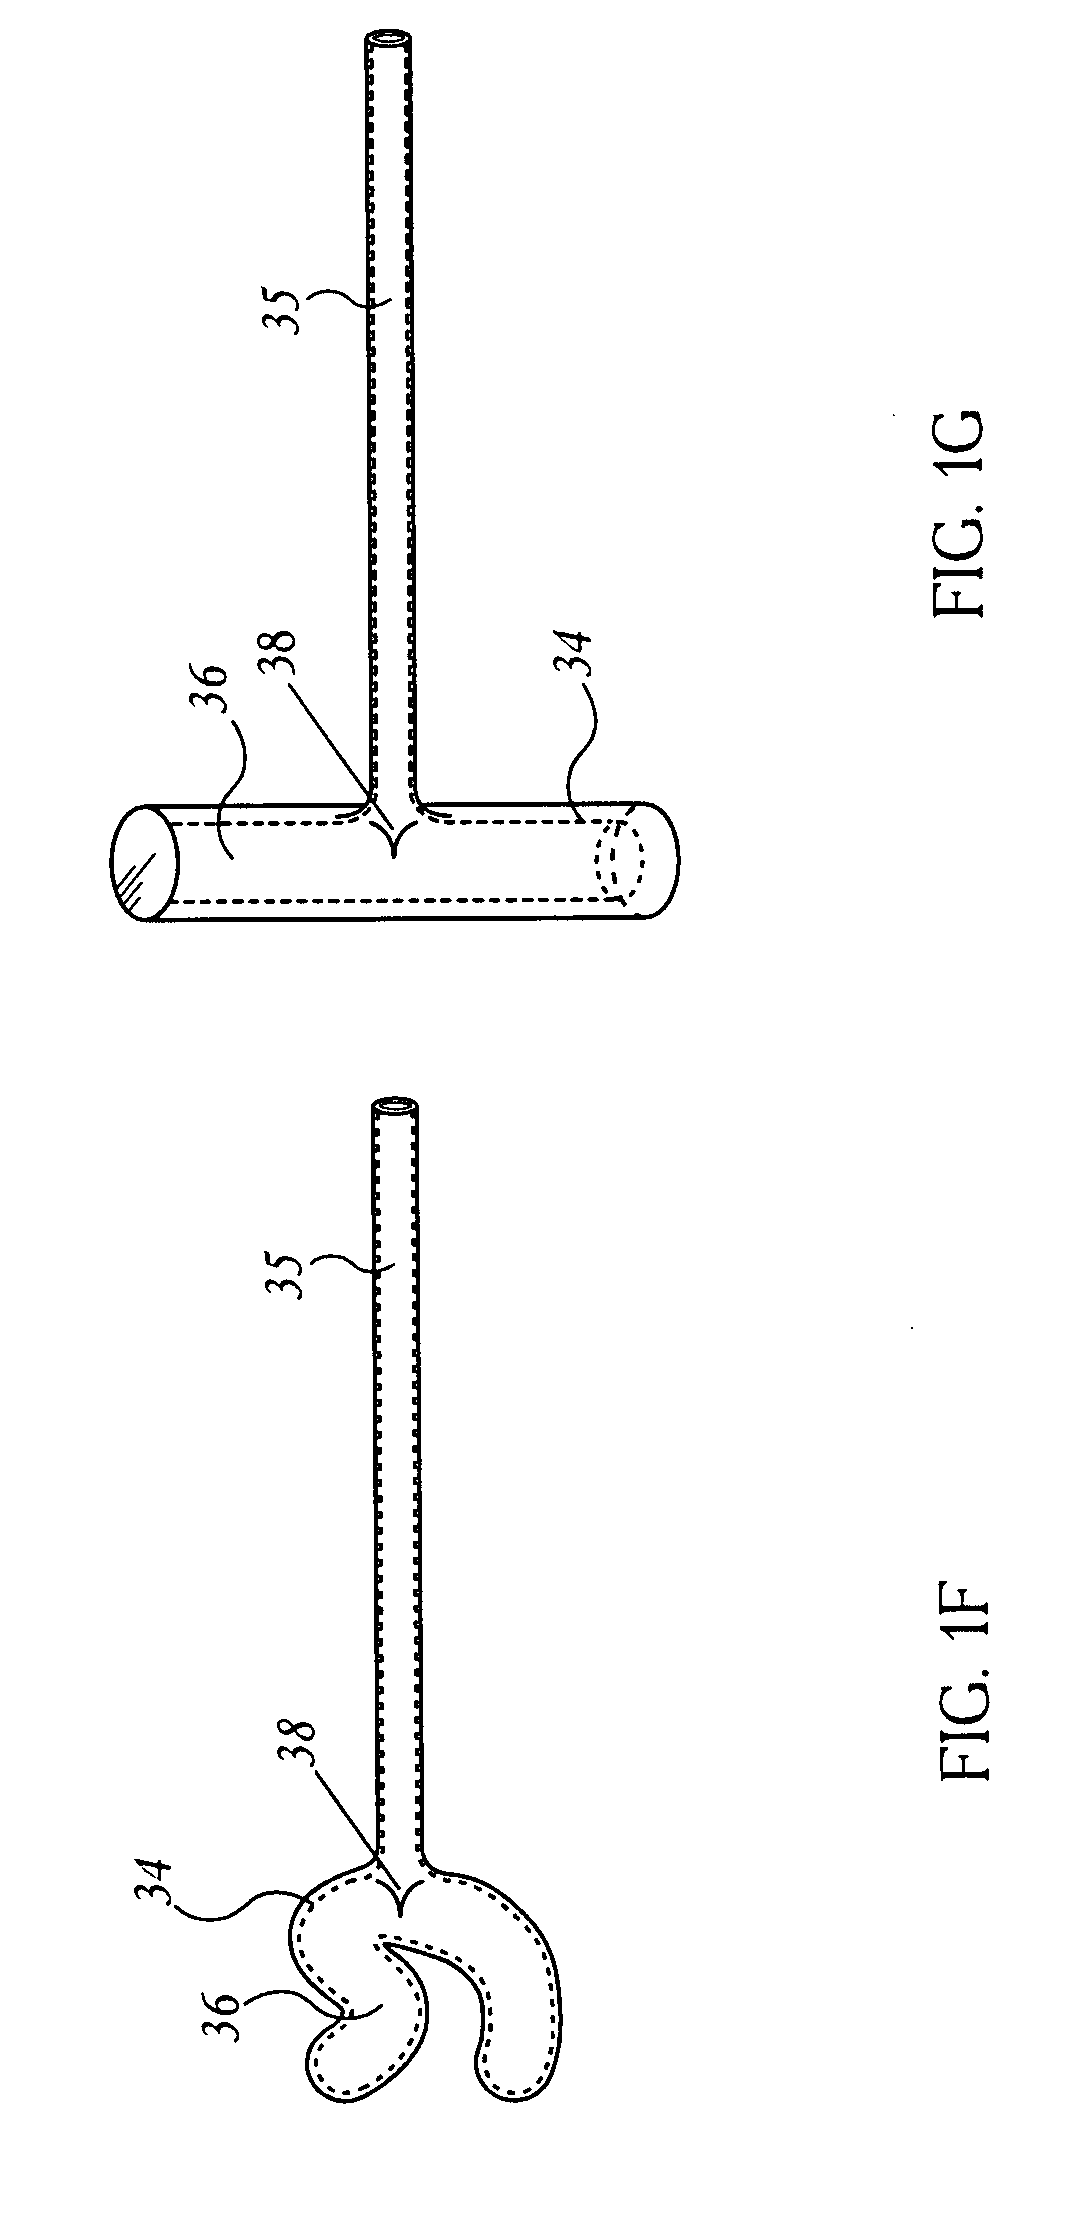 Methods and devices to facilitate connections between body lumens